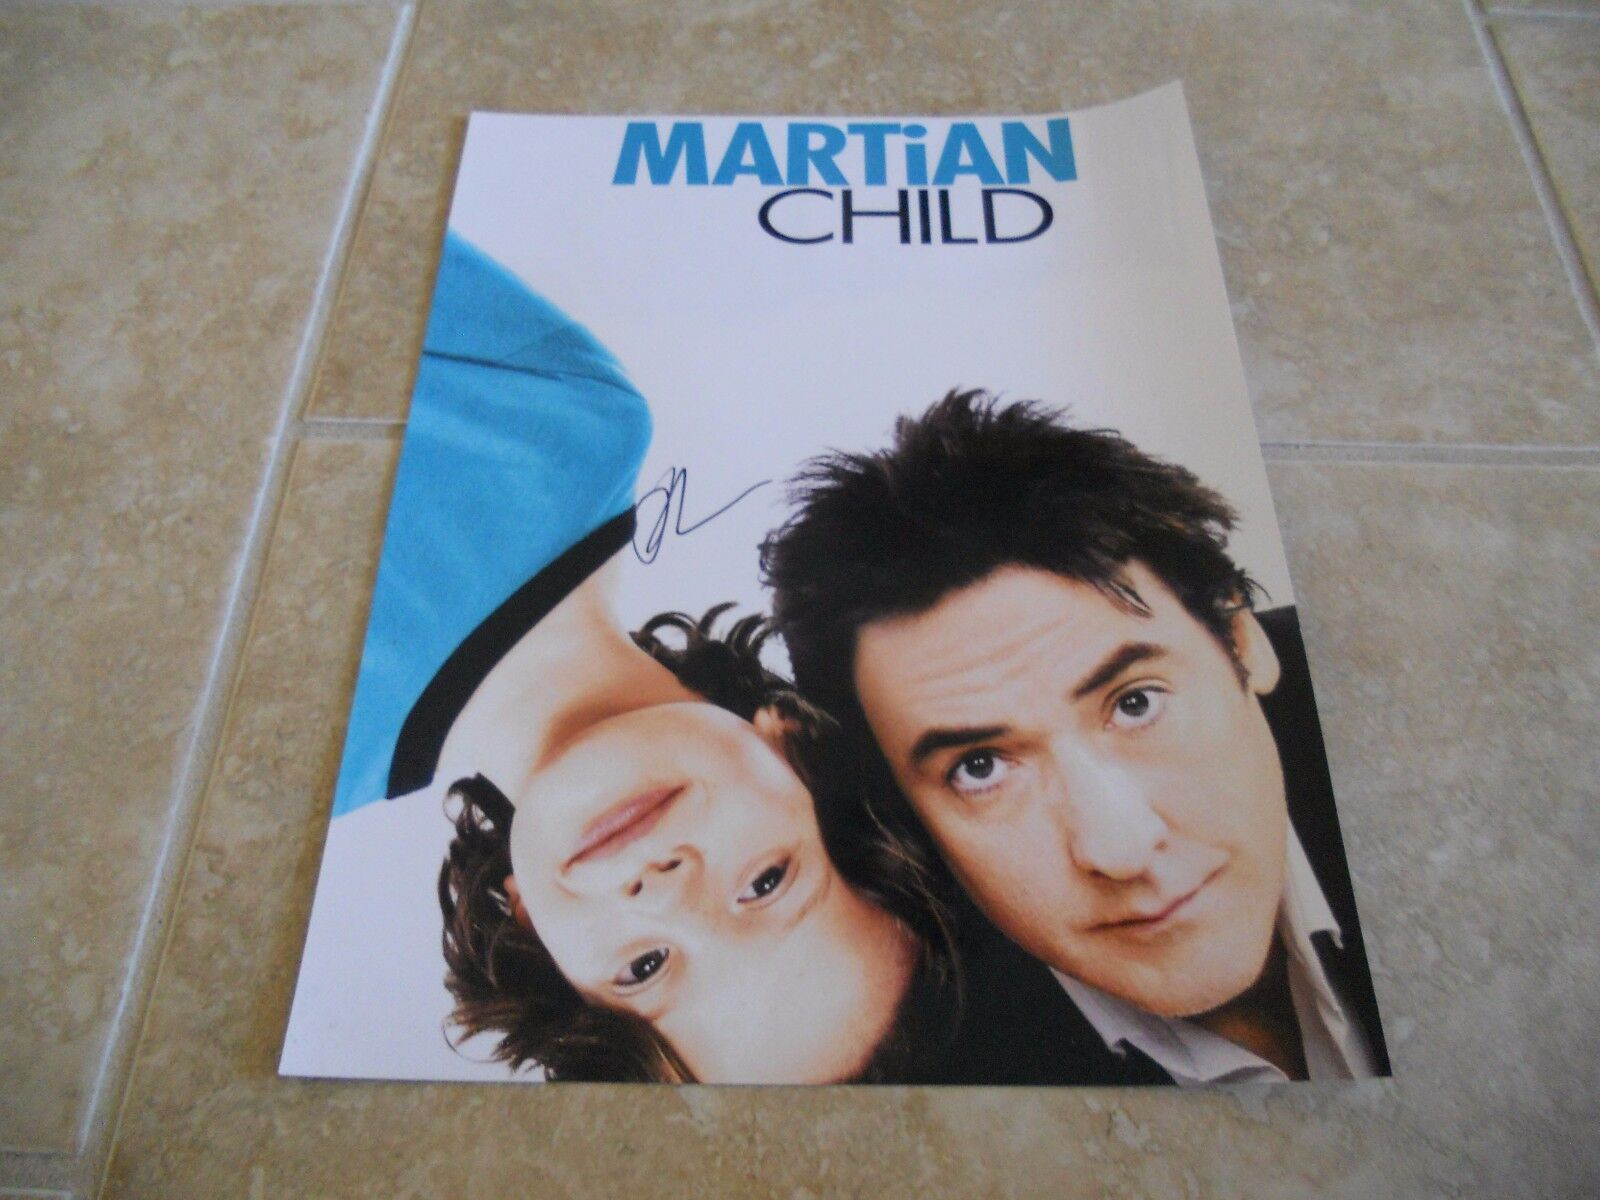 John Cusack Autographed Signed 11x14 Martian Child Movie Photo Poster painting PSA Guaranteed F4